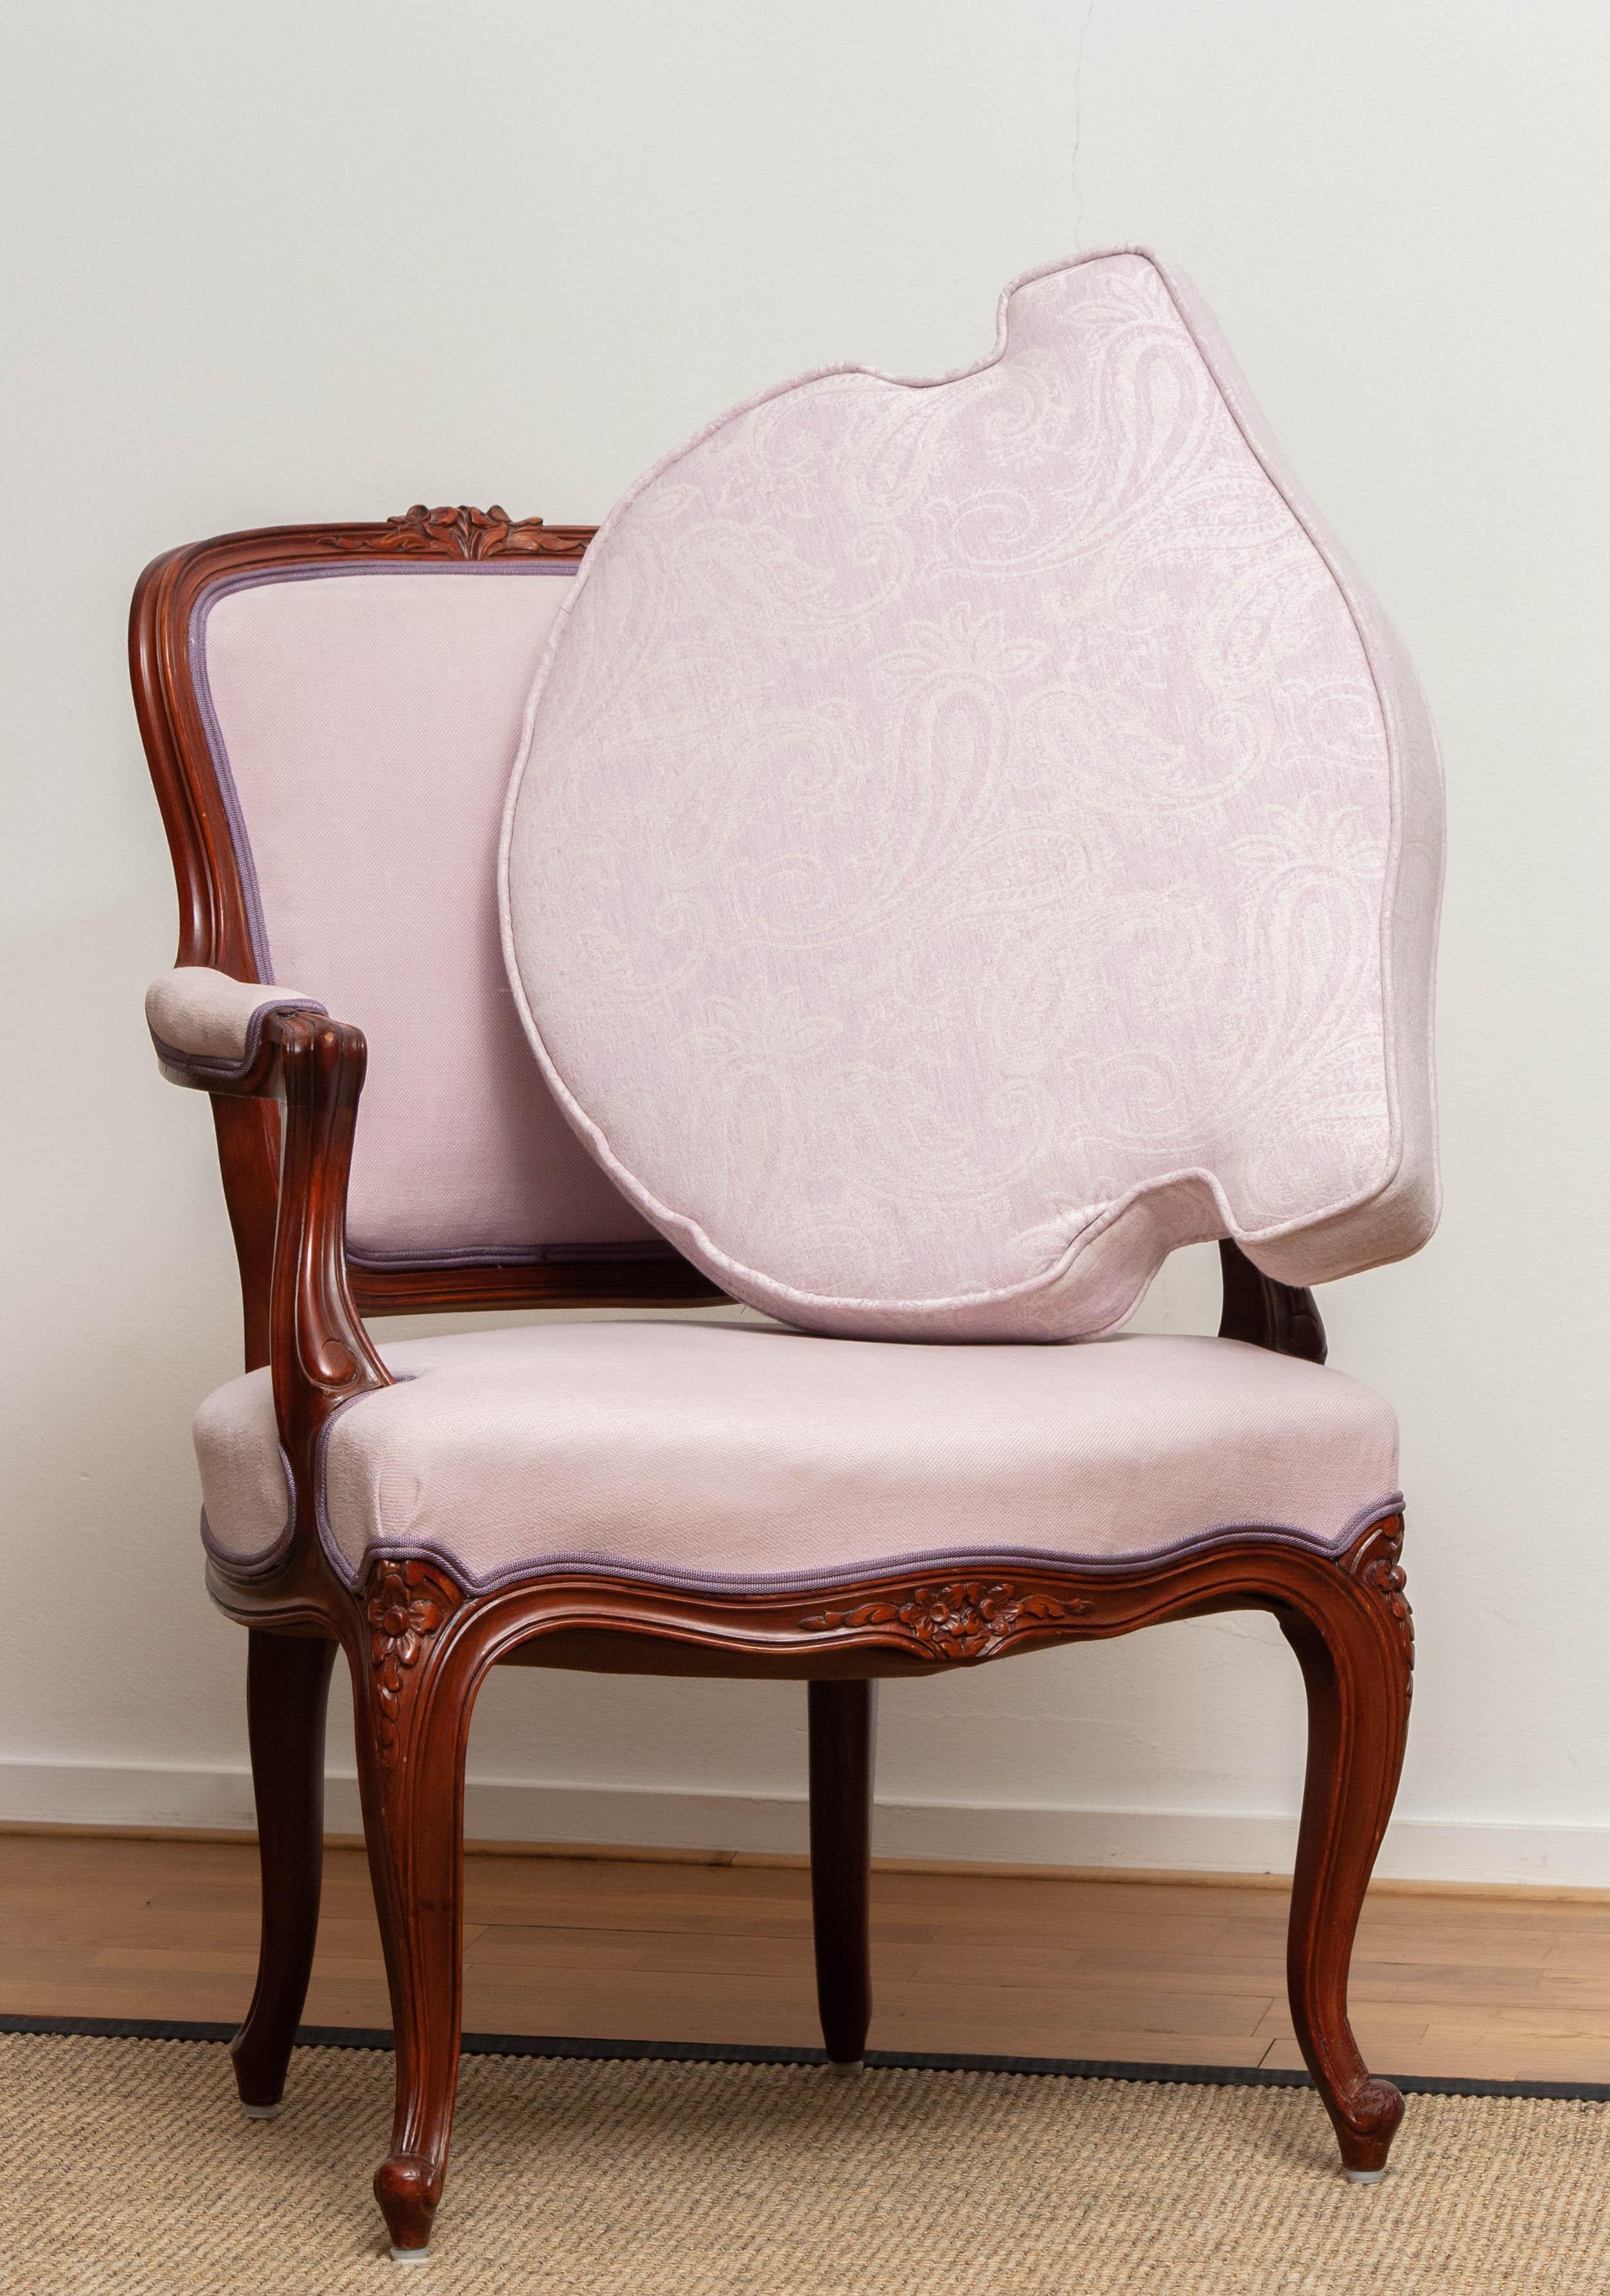 1950s, Pink Swedish Rococo Bergères in the Shabby Chic Technique 1 2